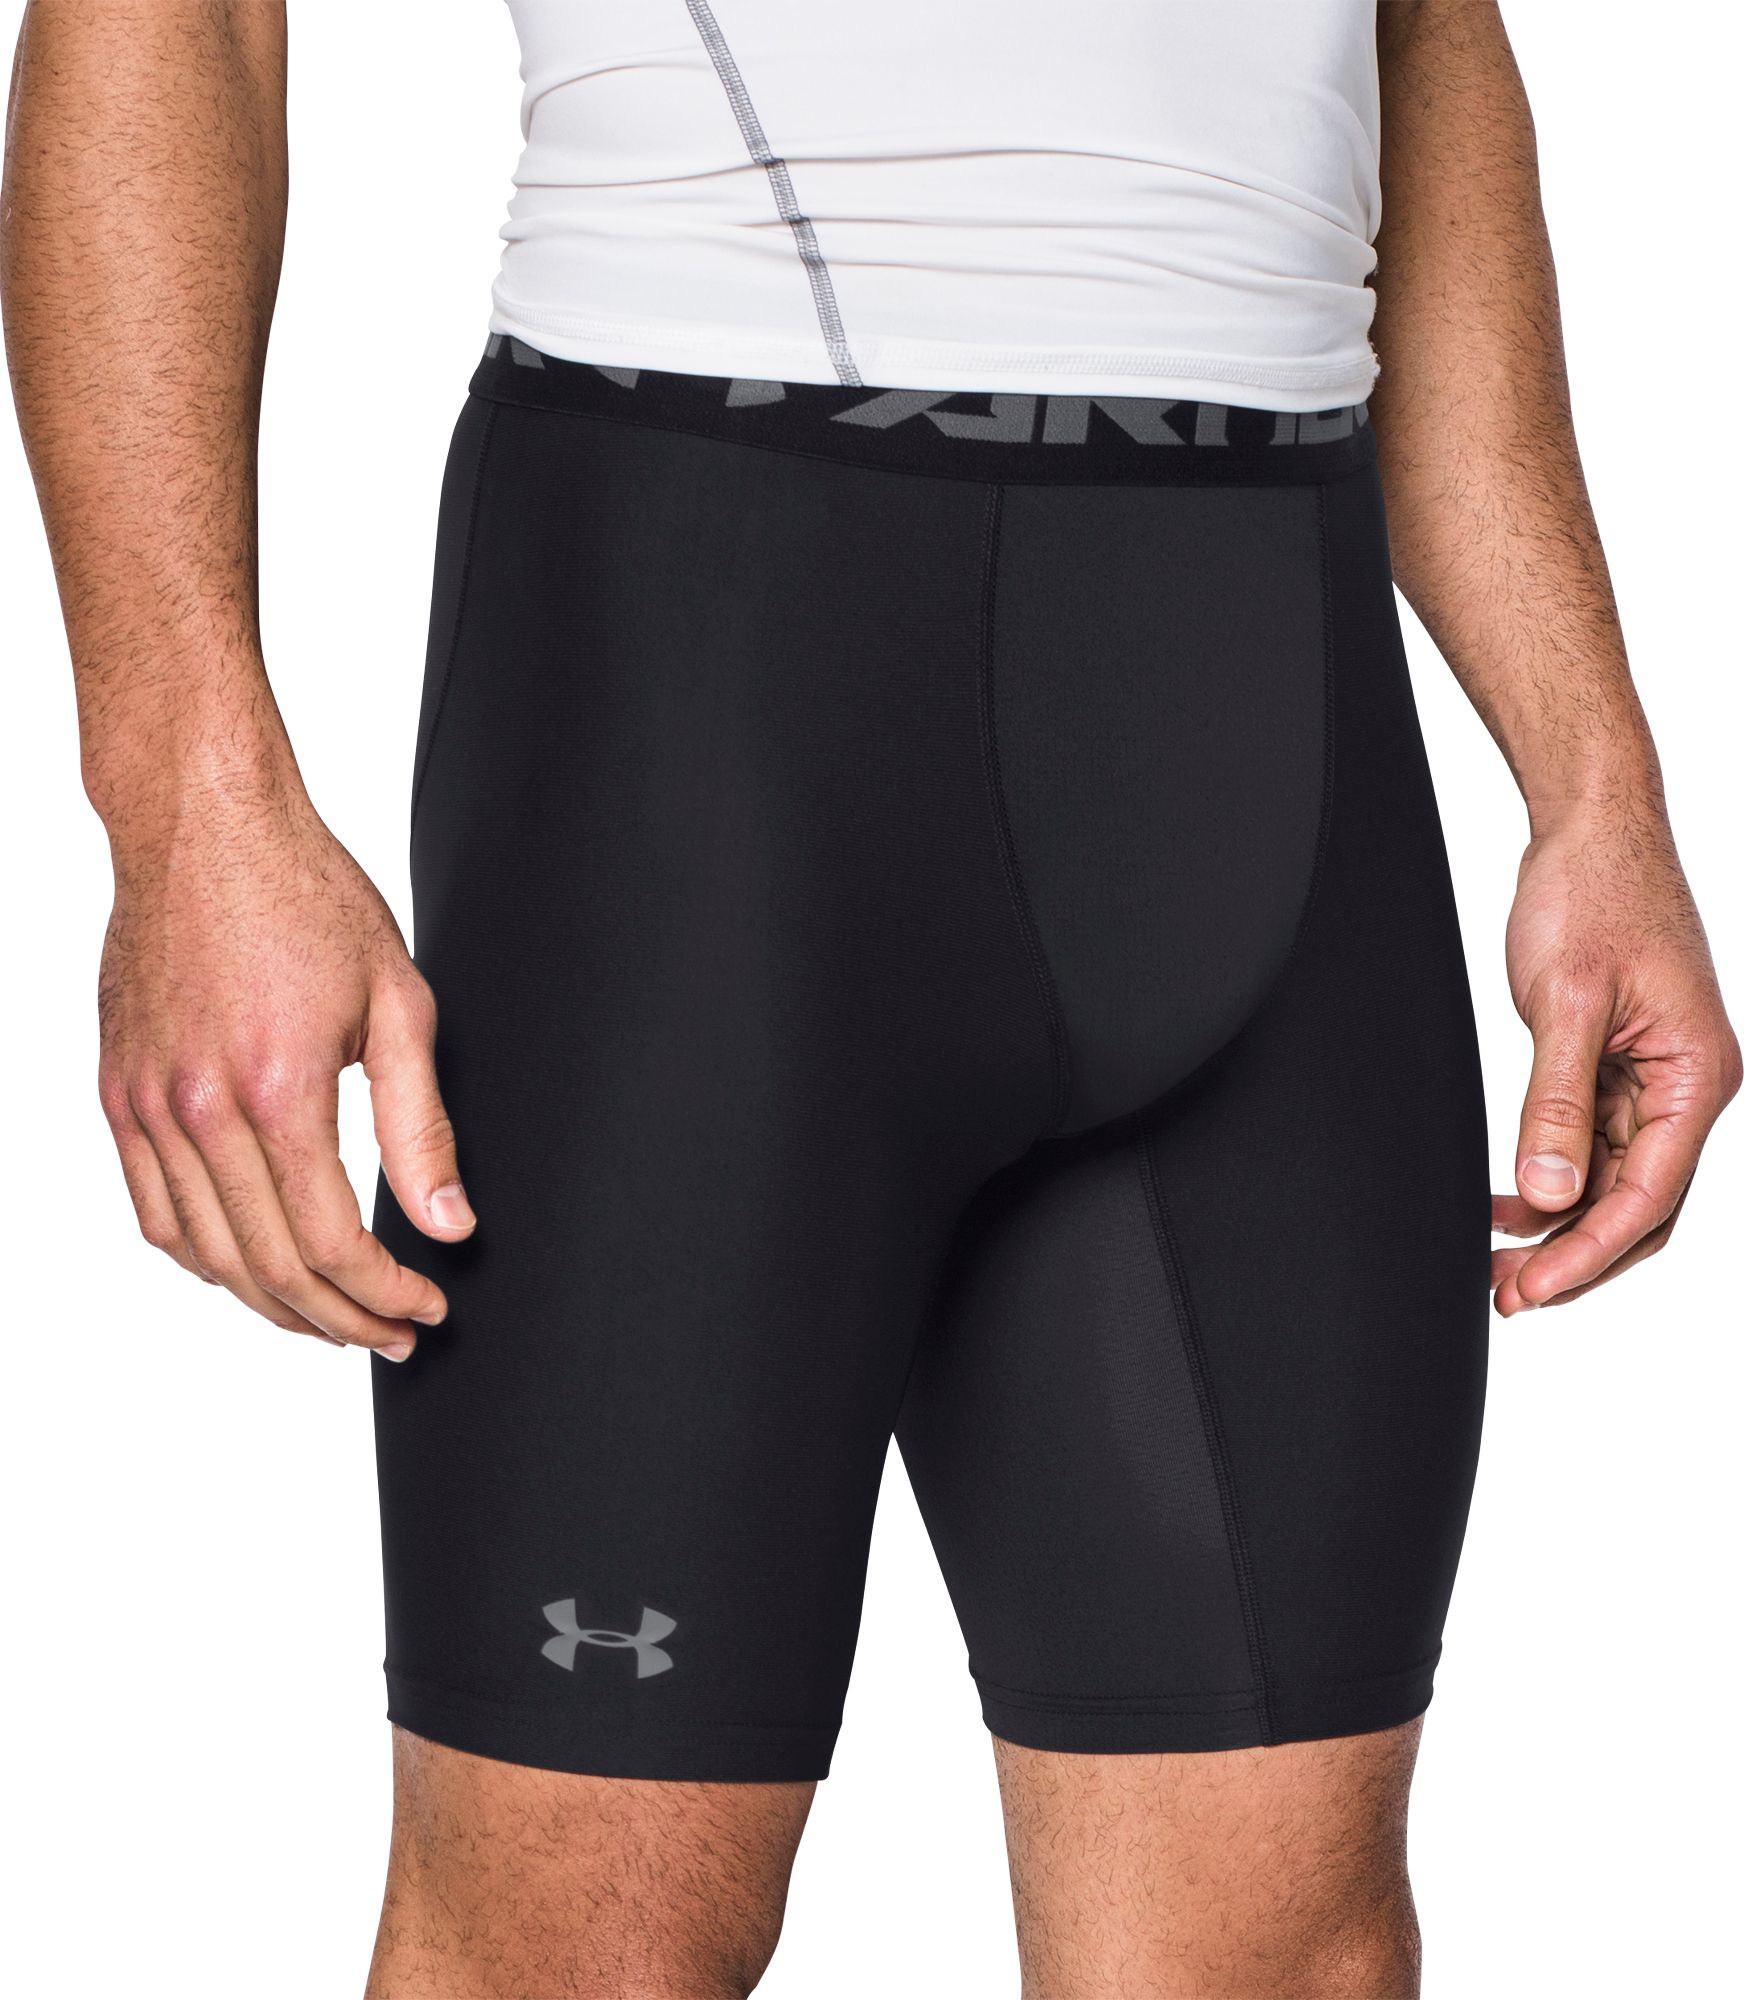 Bring out the sports look in you by wearing Compression Shorts